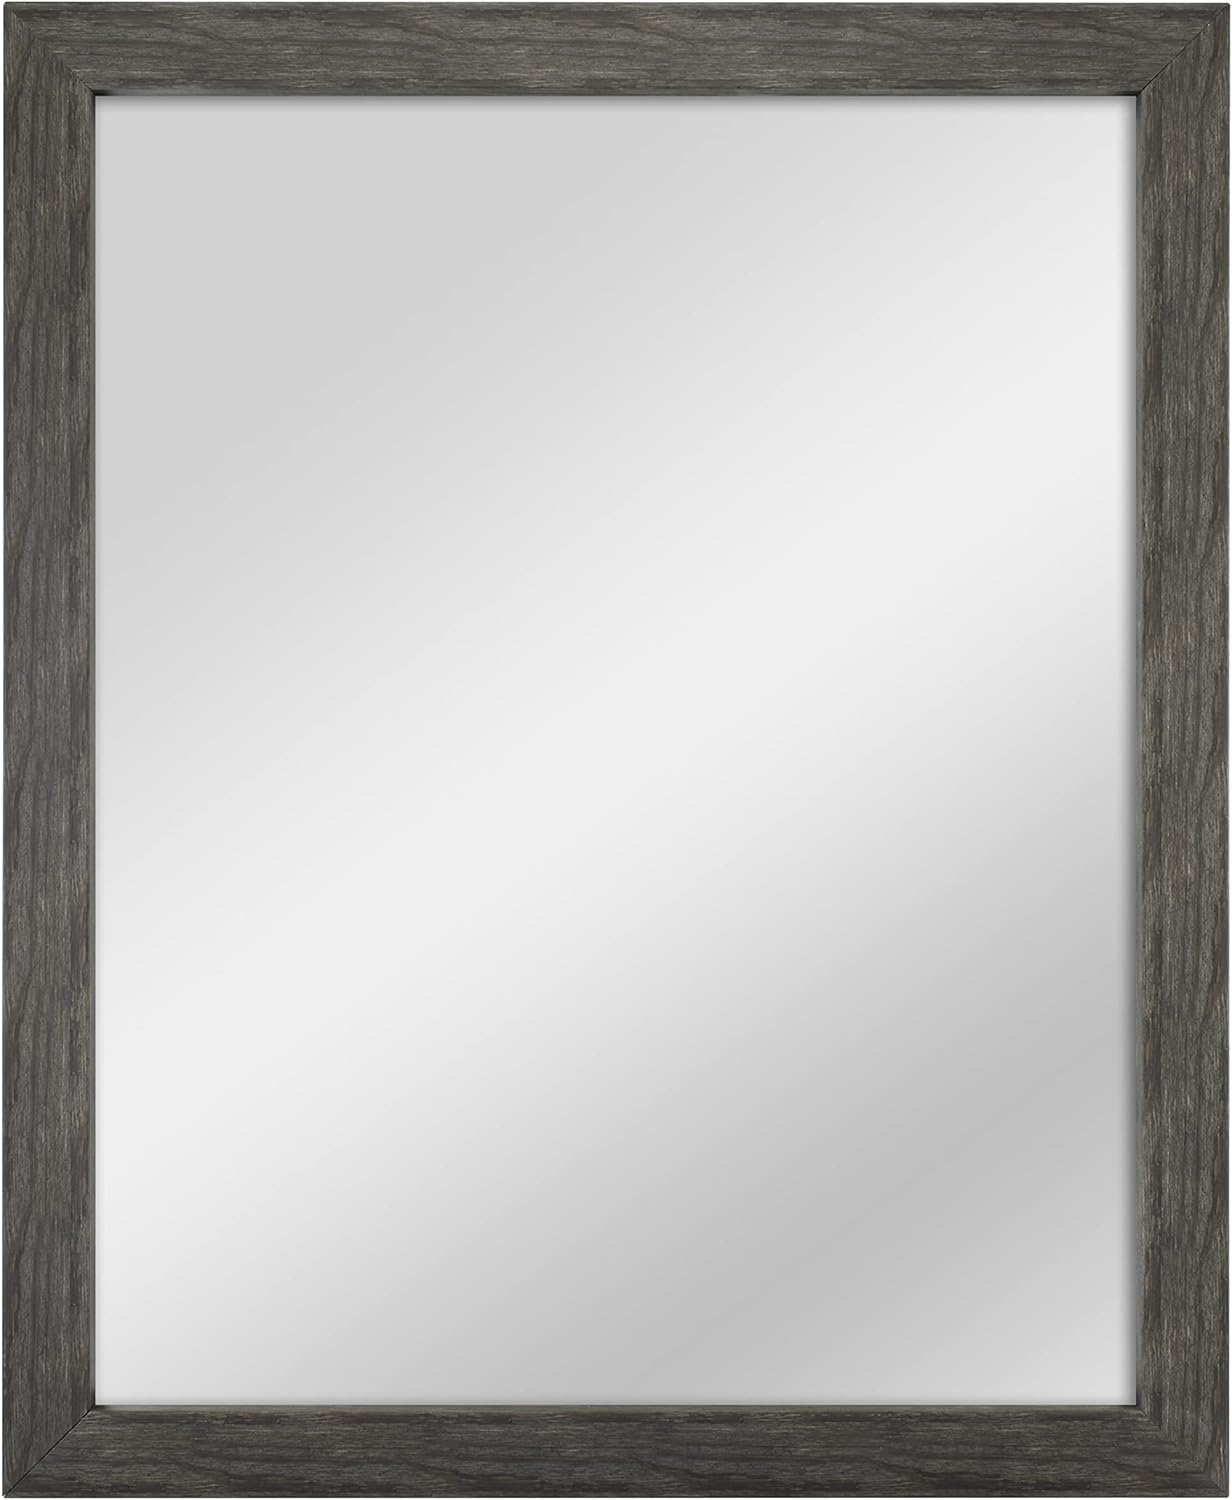 MCS Thin Gallery Large Wall Mirror, Modern Rectangle Mirror Home Decor for Living Room, Bedroom, or Bathroom, 27.4 by 33.4 Inch, Black Woodgrain